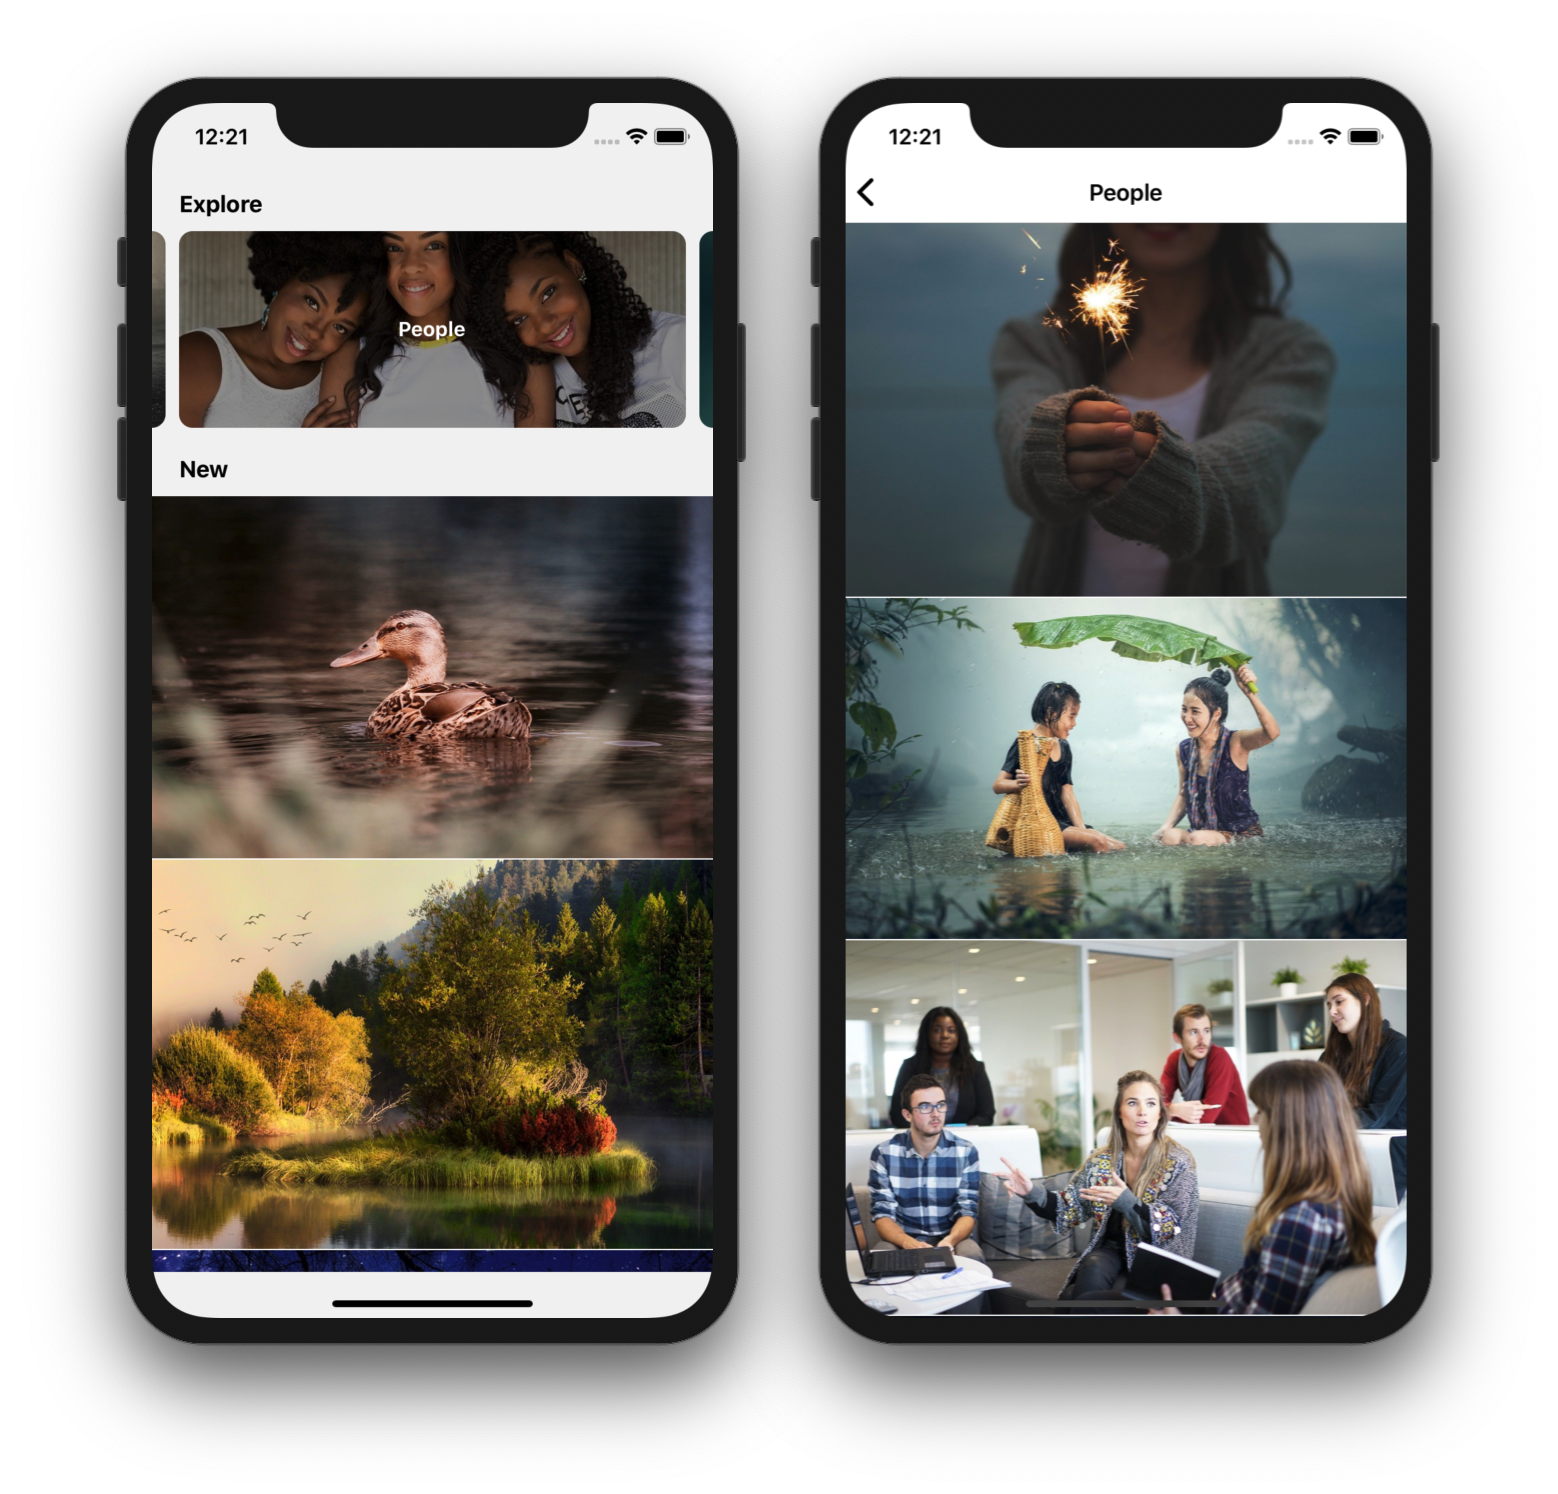 React Native stock photo browser explore and search results screens